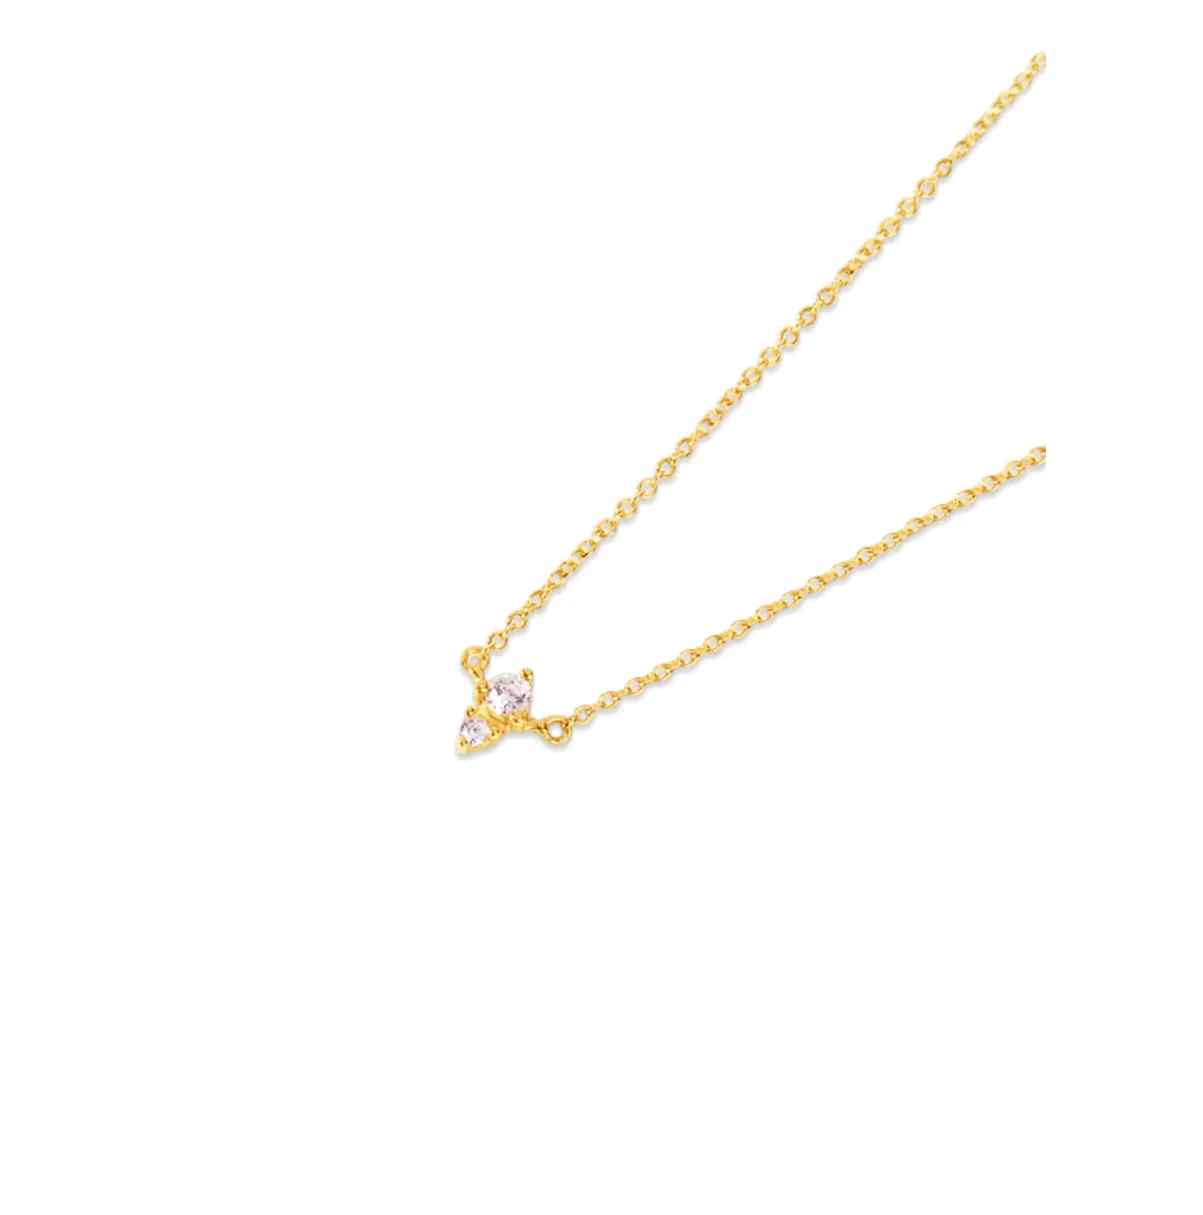 Crystal Crescent Moon Lariat Necklace in Gold